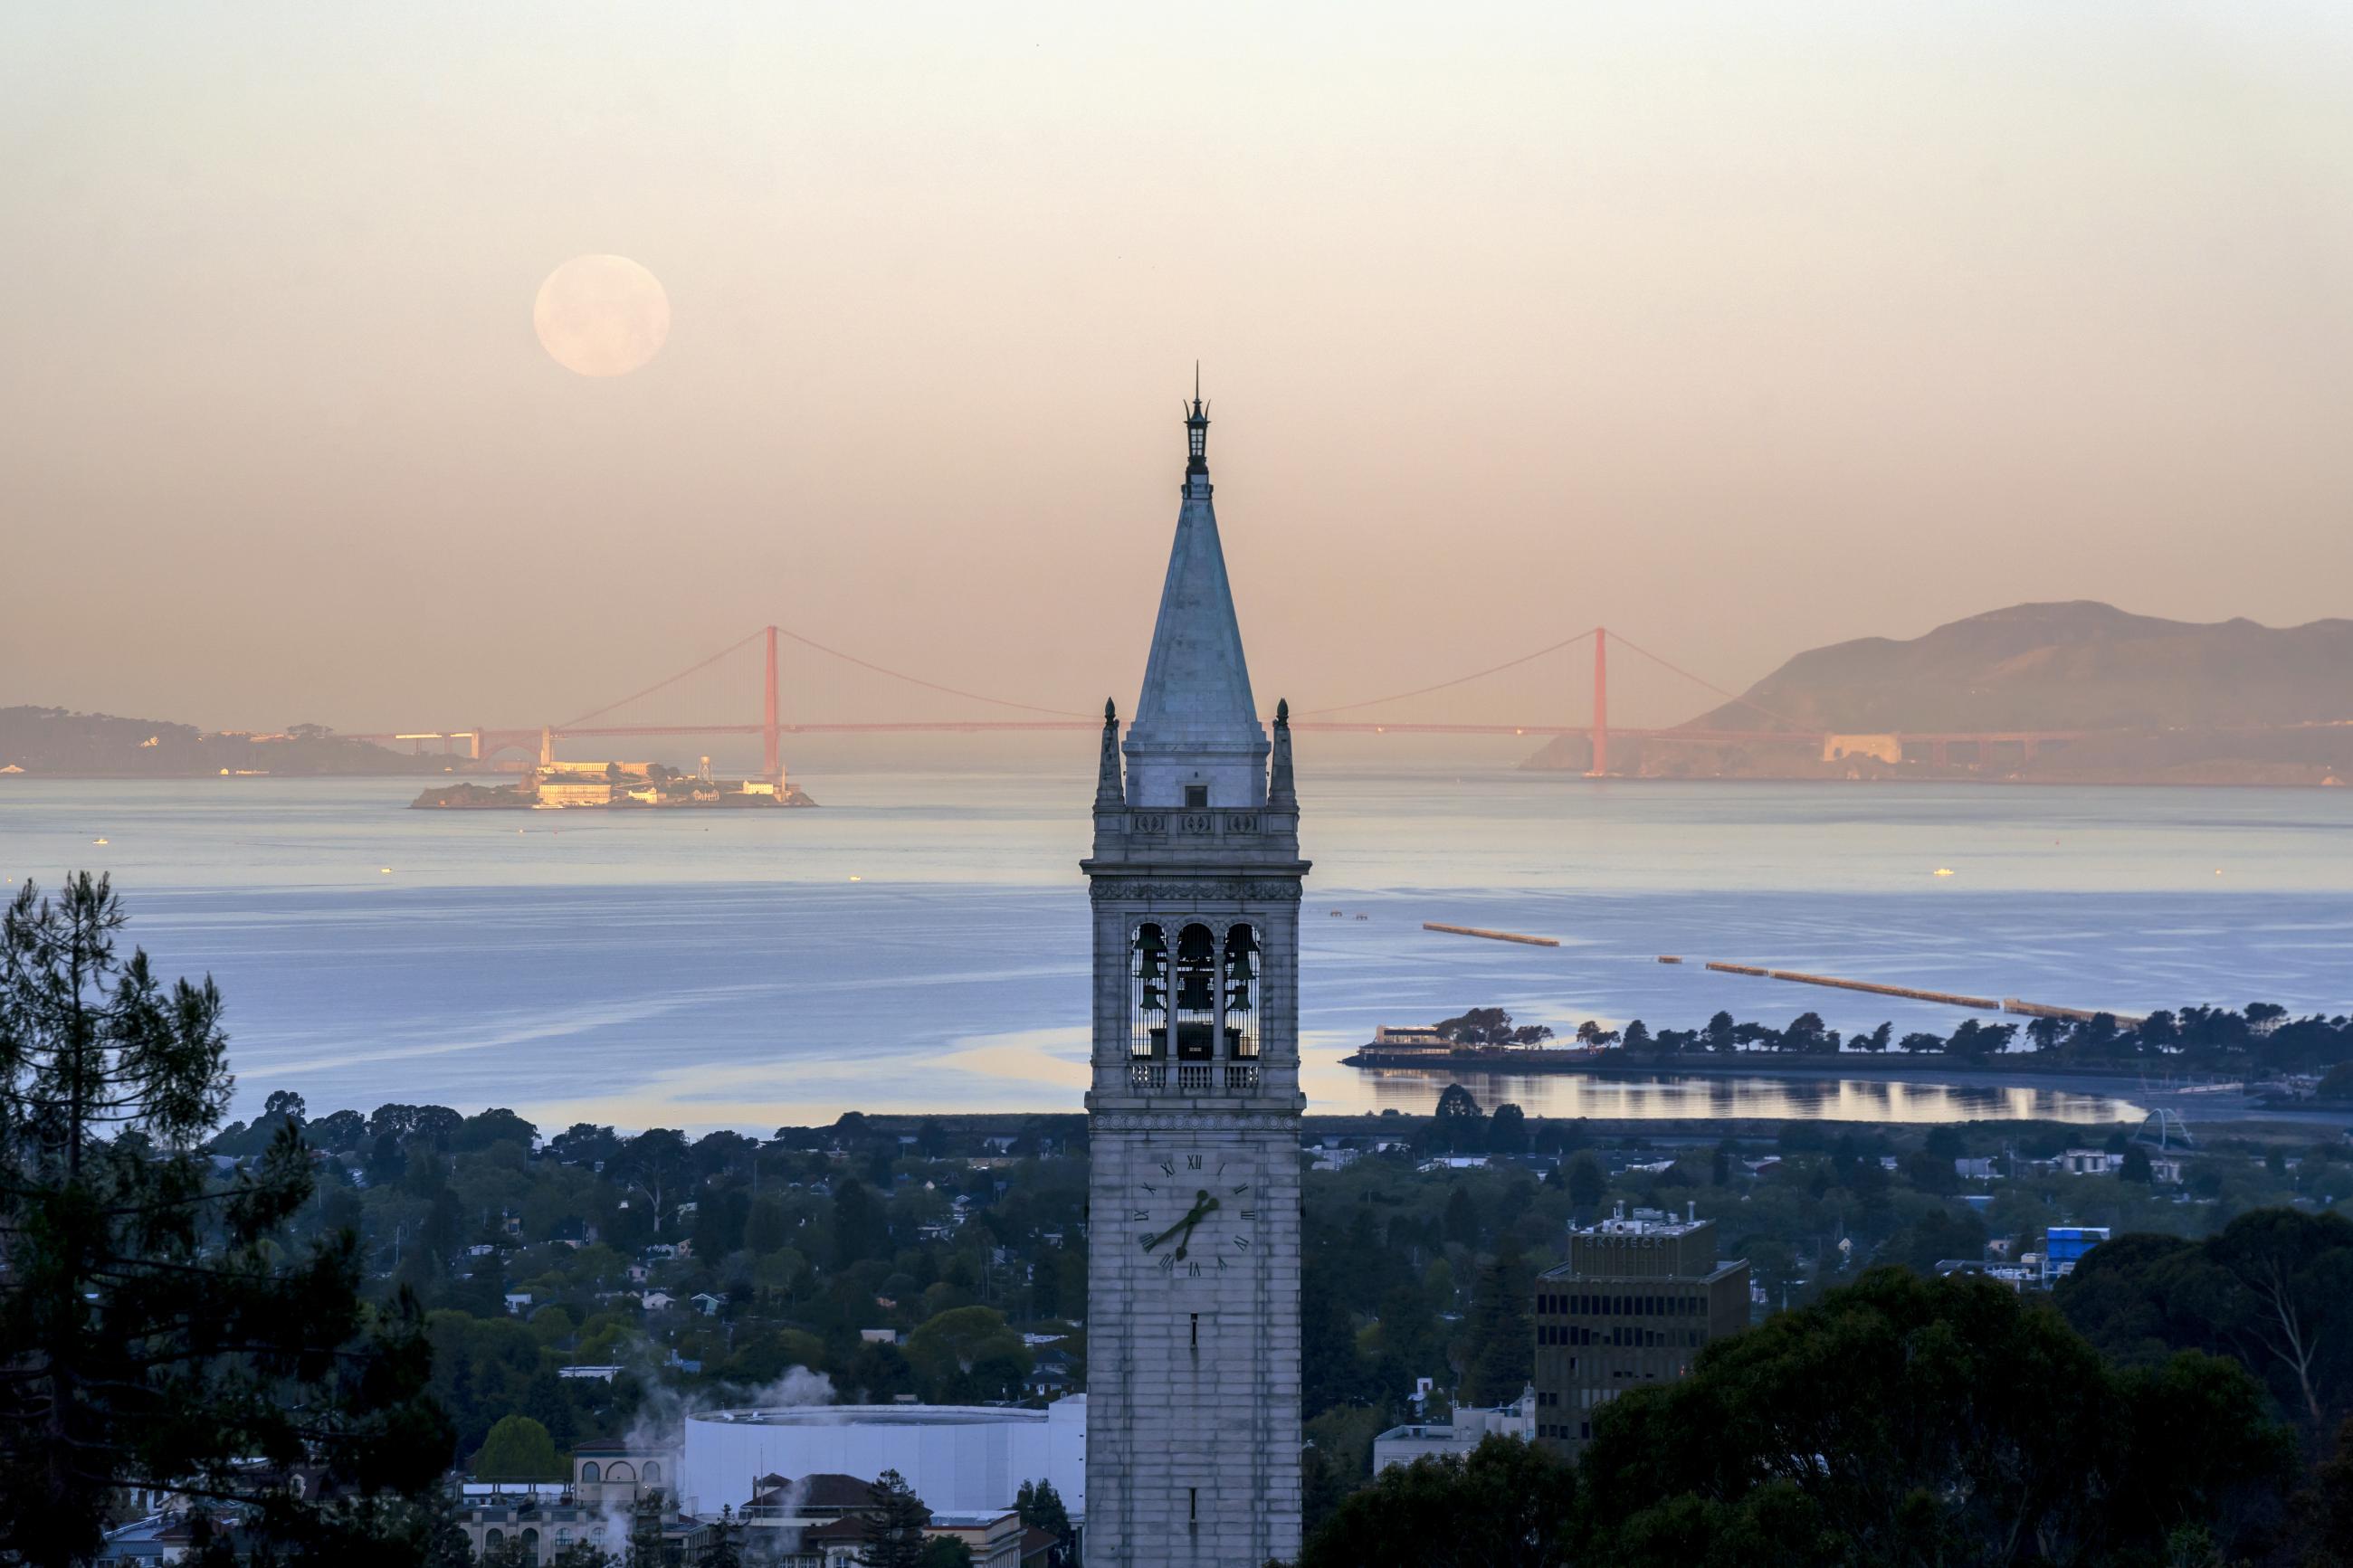 Sather Tower with the Golden Gate Bridge in the background. (Photo / Adam Lau/Berkeley Engineering)